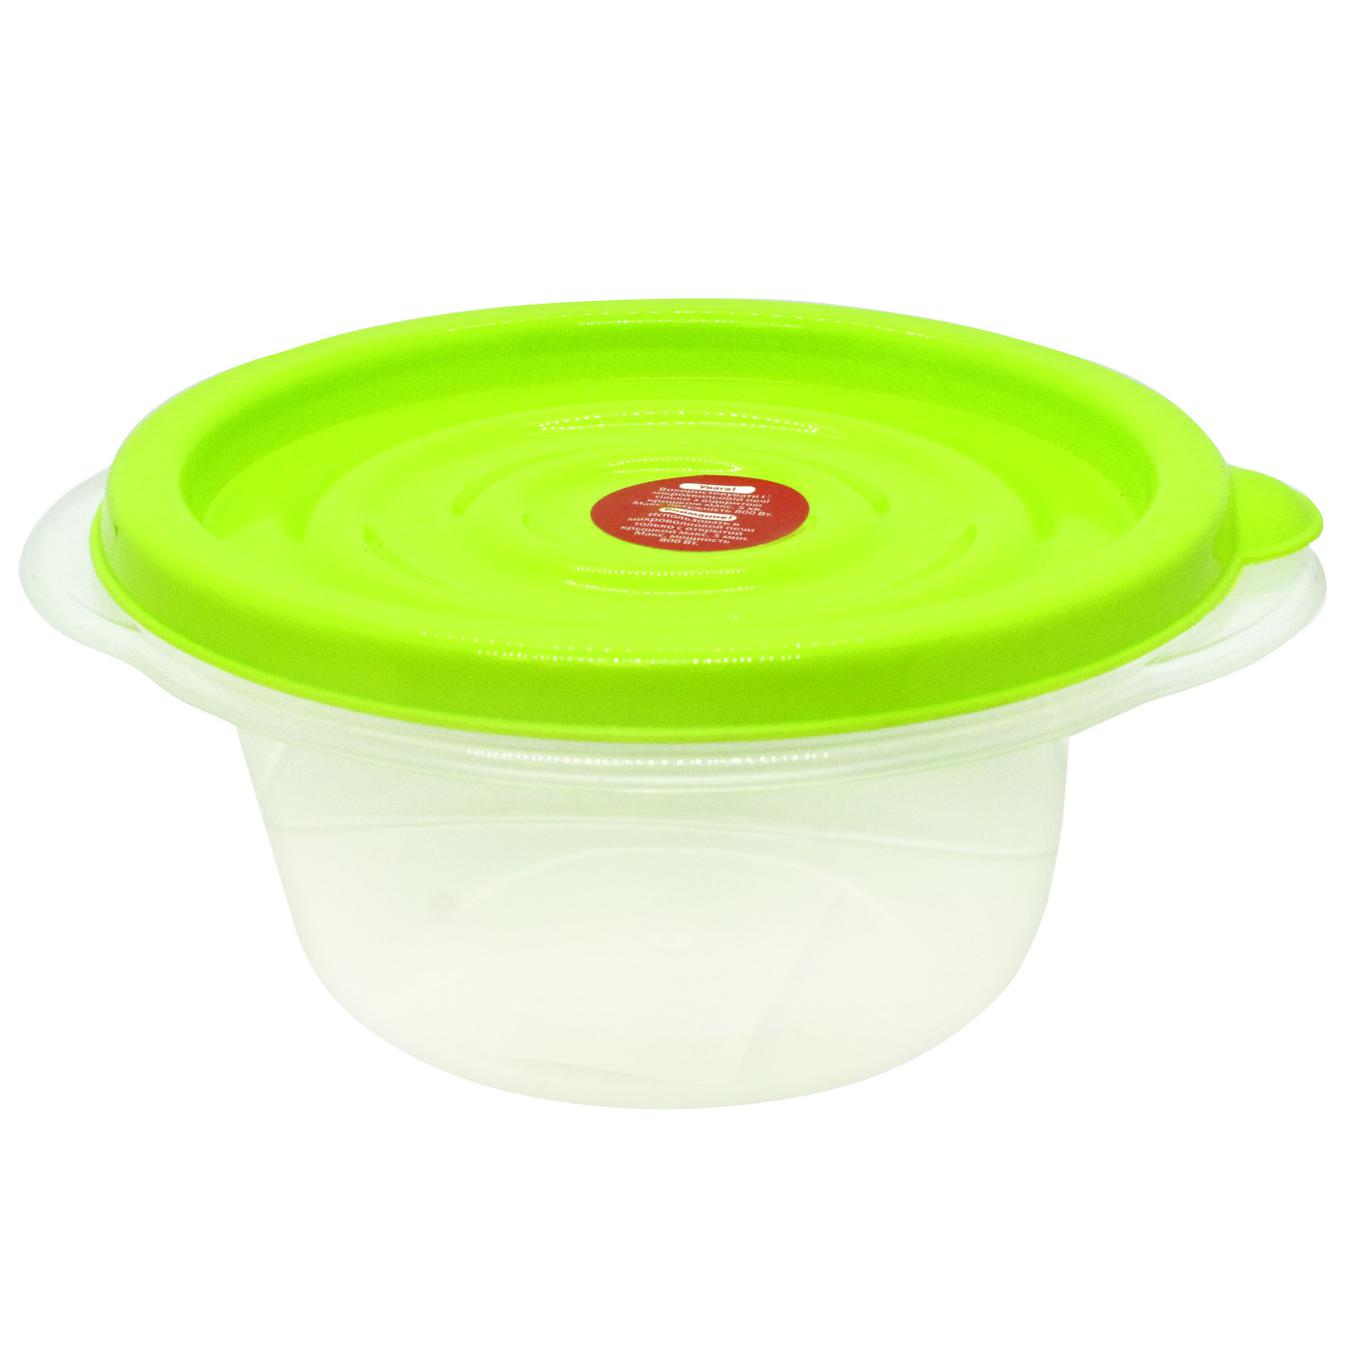 Aleana container for storing food products Omega round transparent/olive 0.44 l